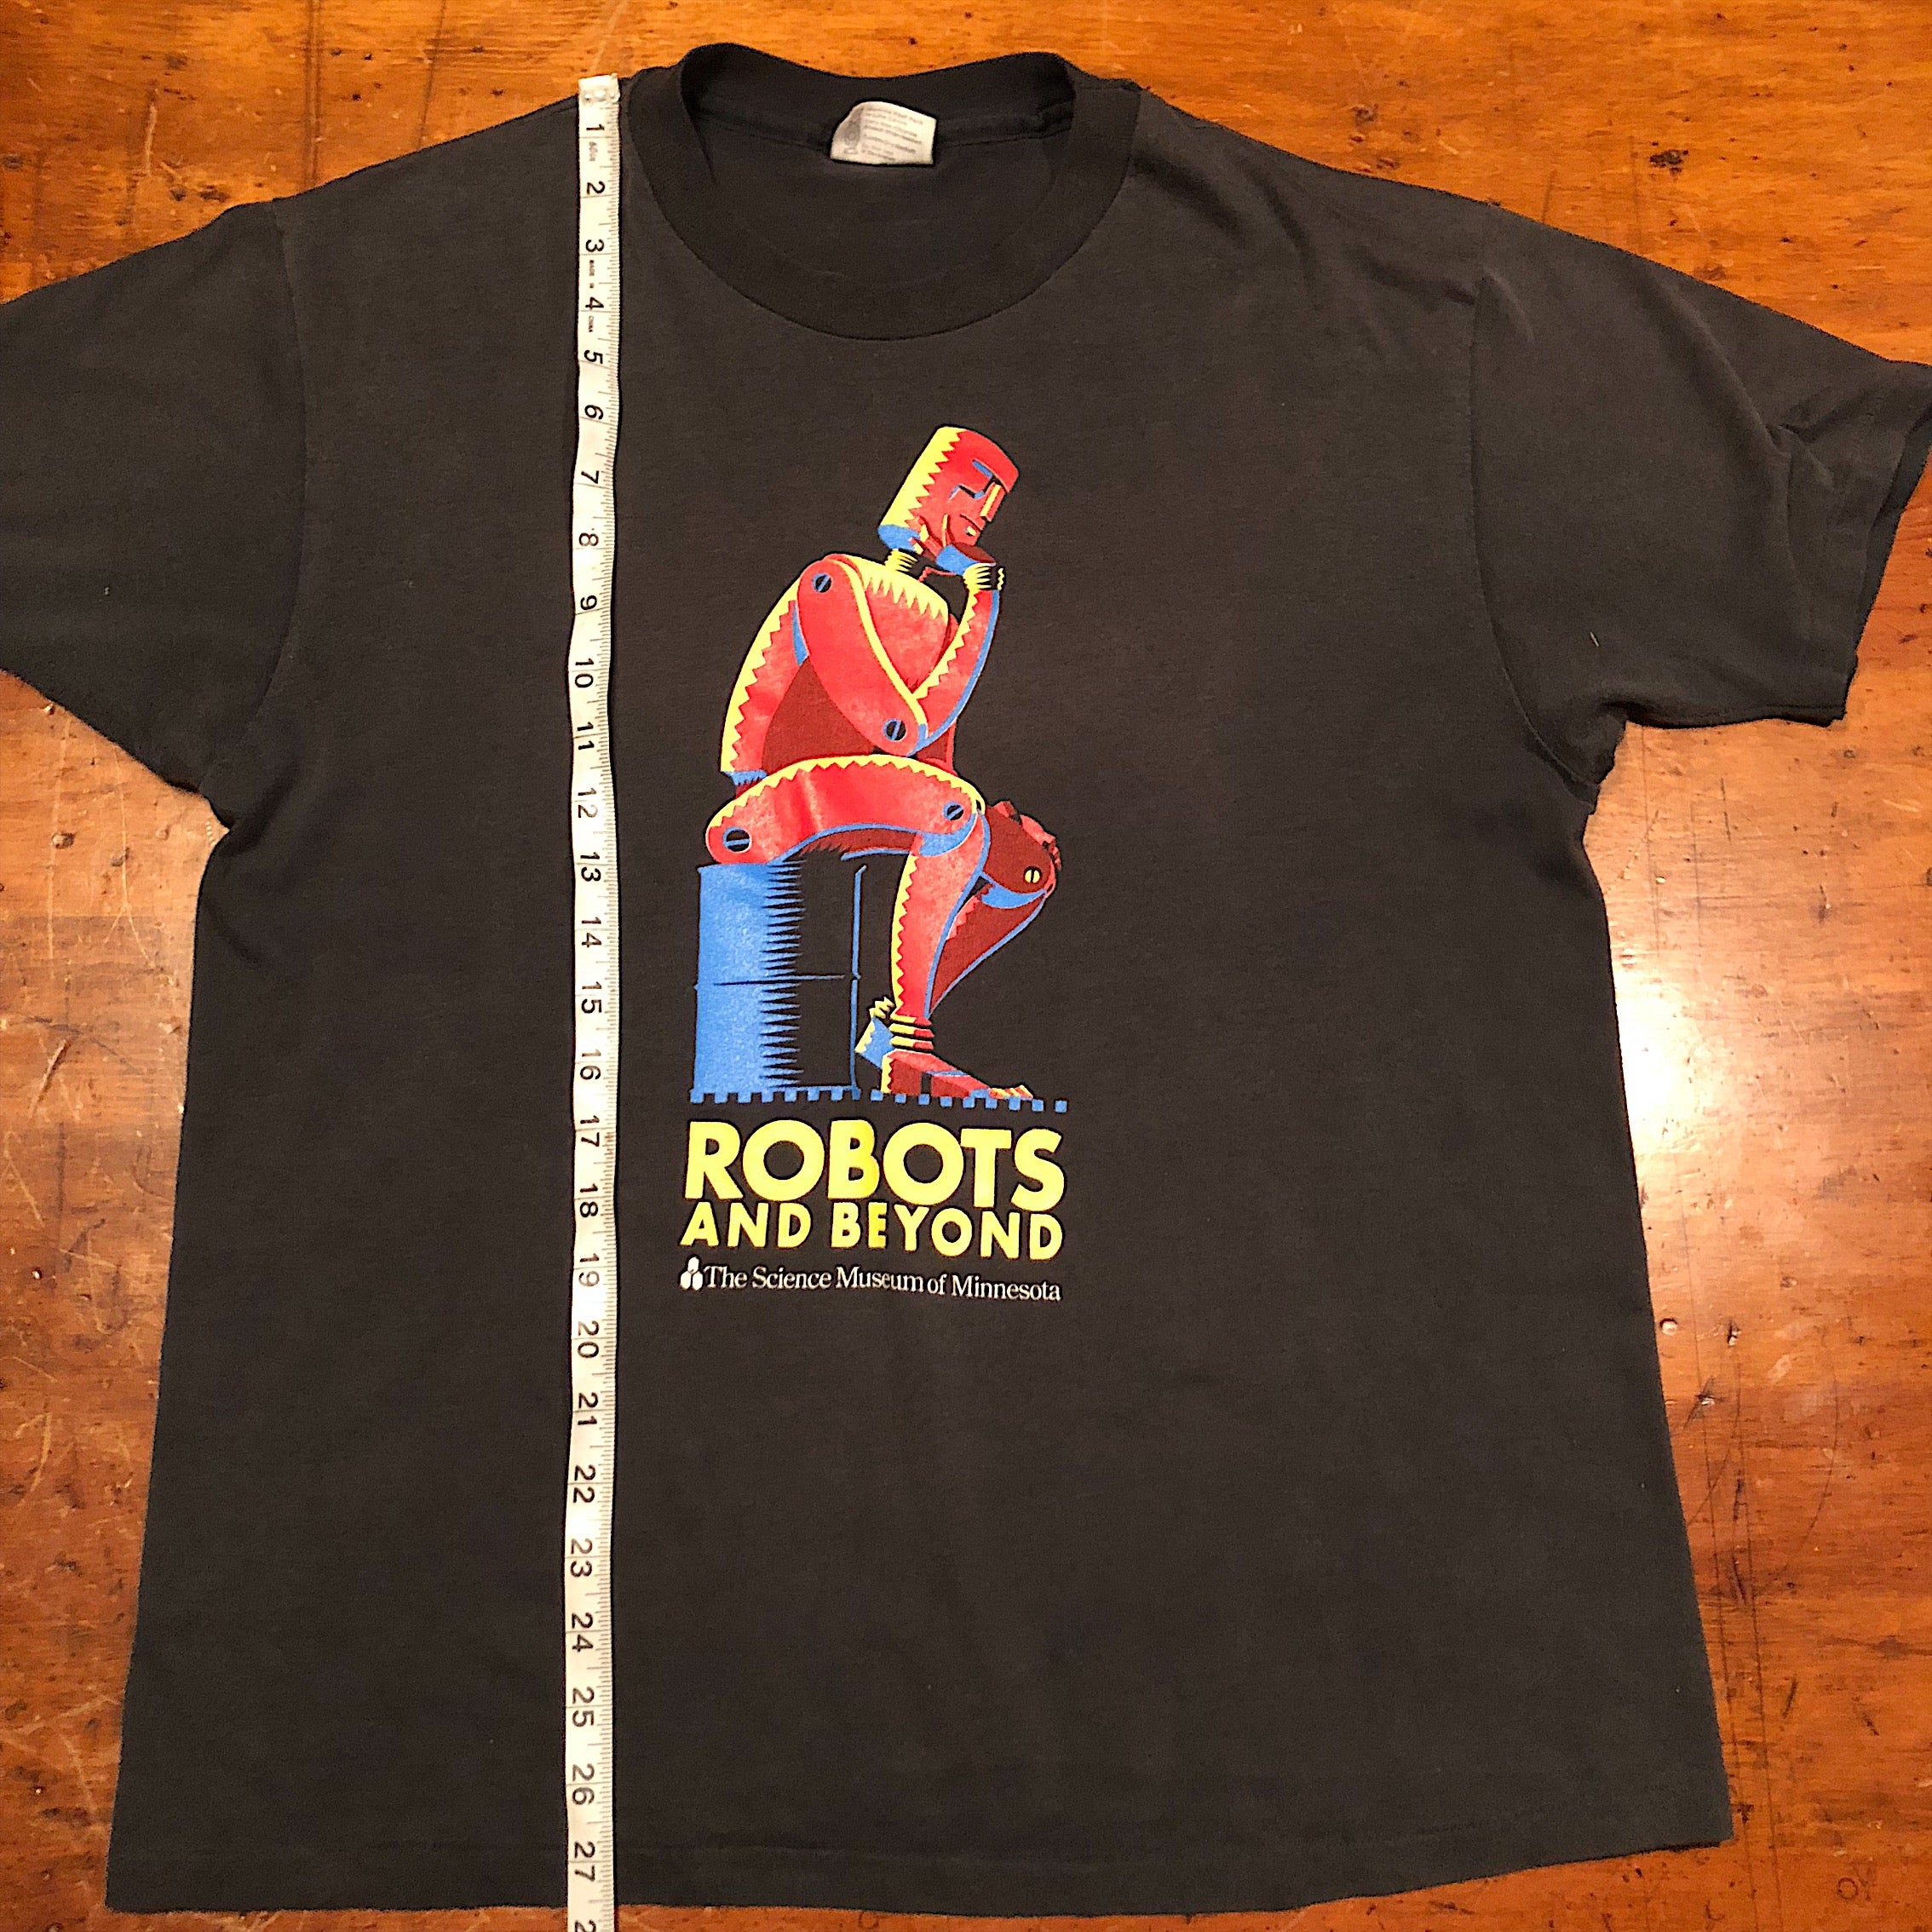 Rare Robot T-Shirt from Science Museum Exhibition - Black XL - "Robots and Beyond" - 1988